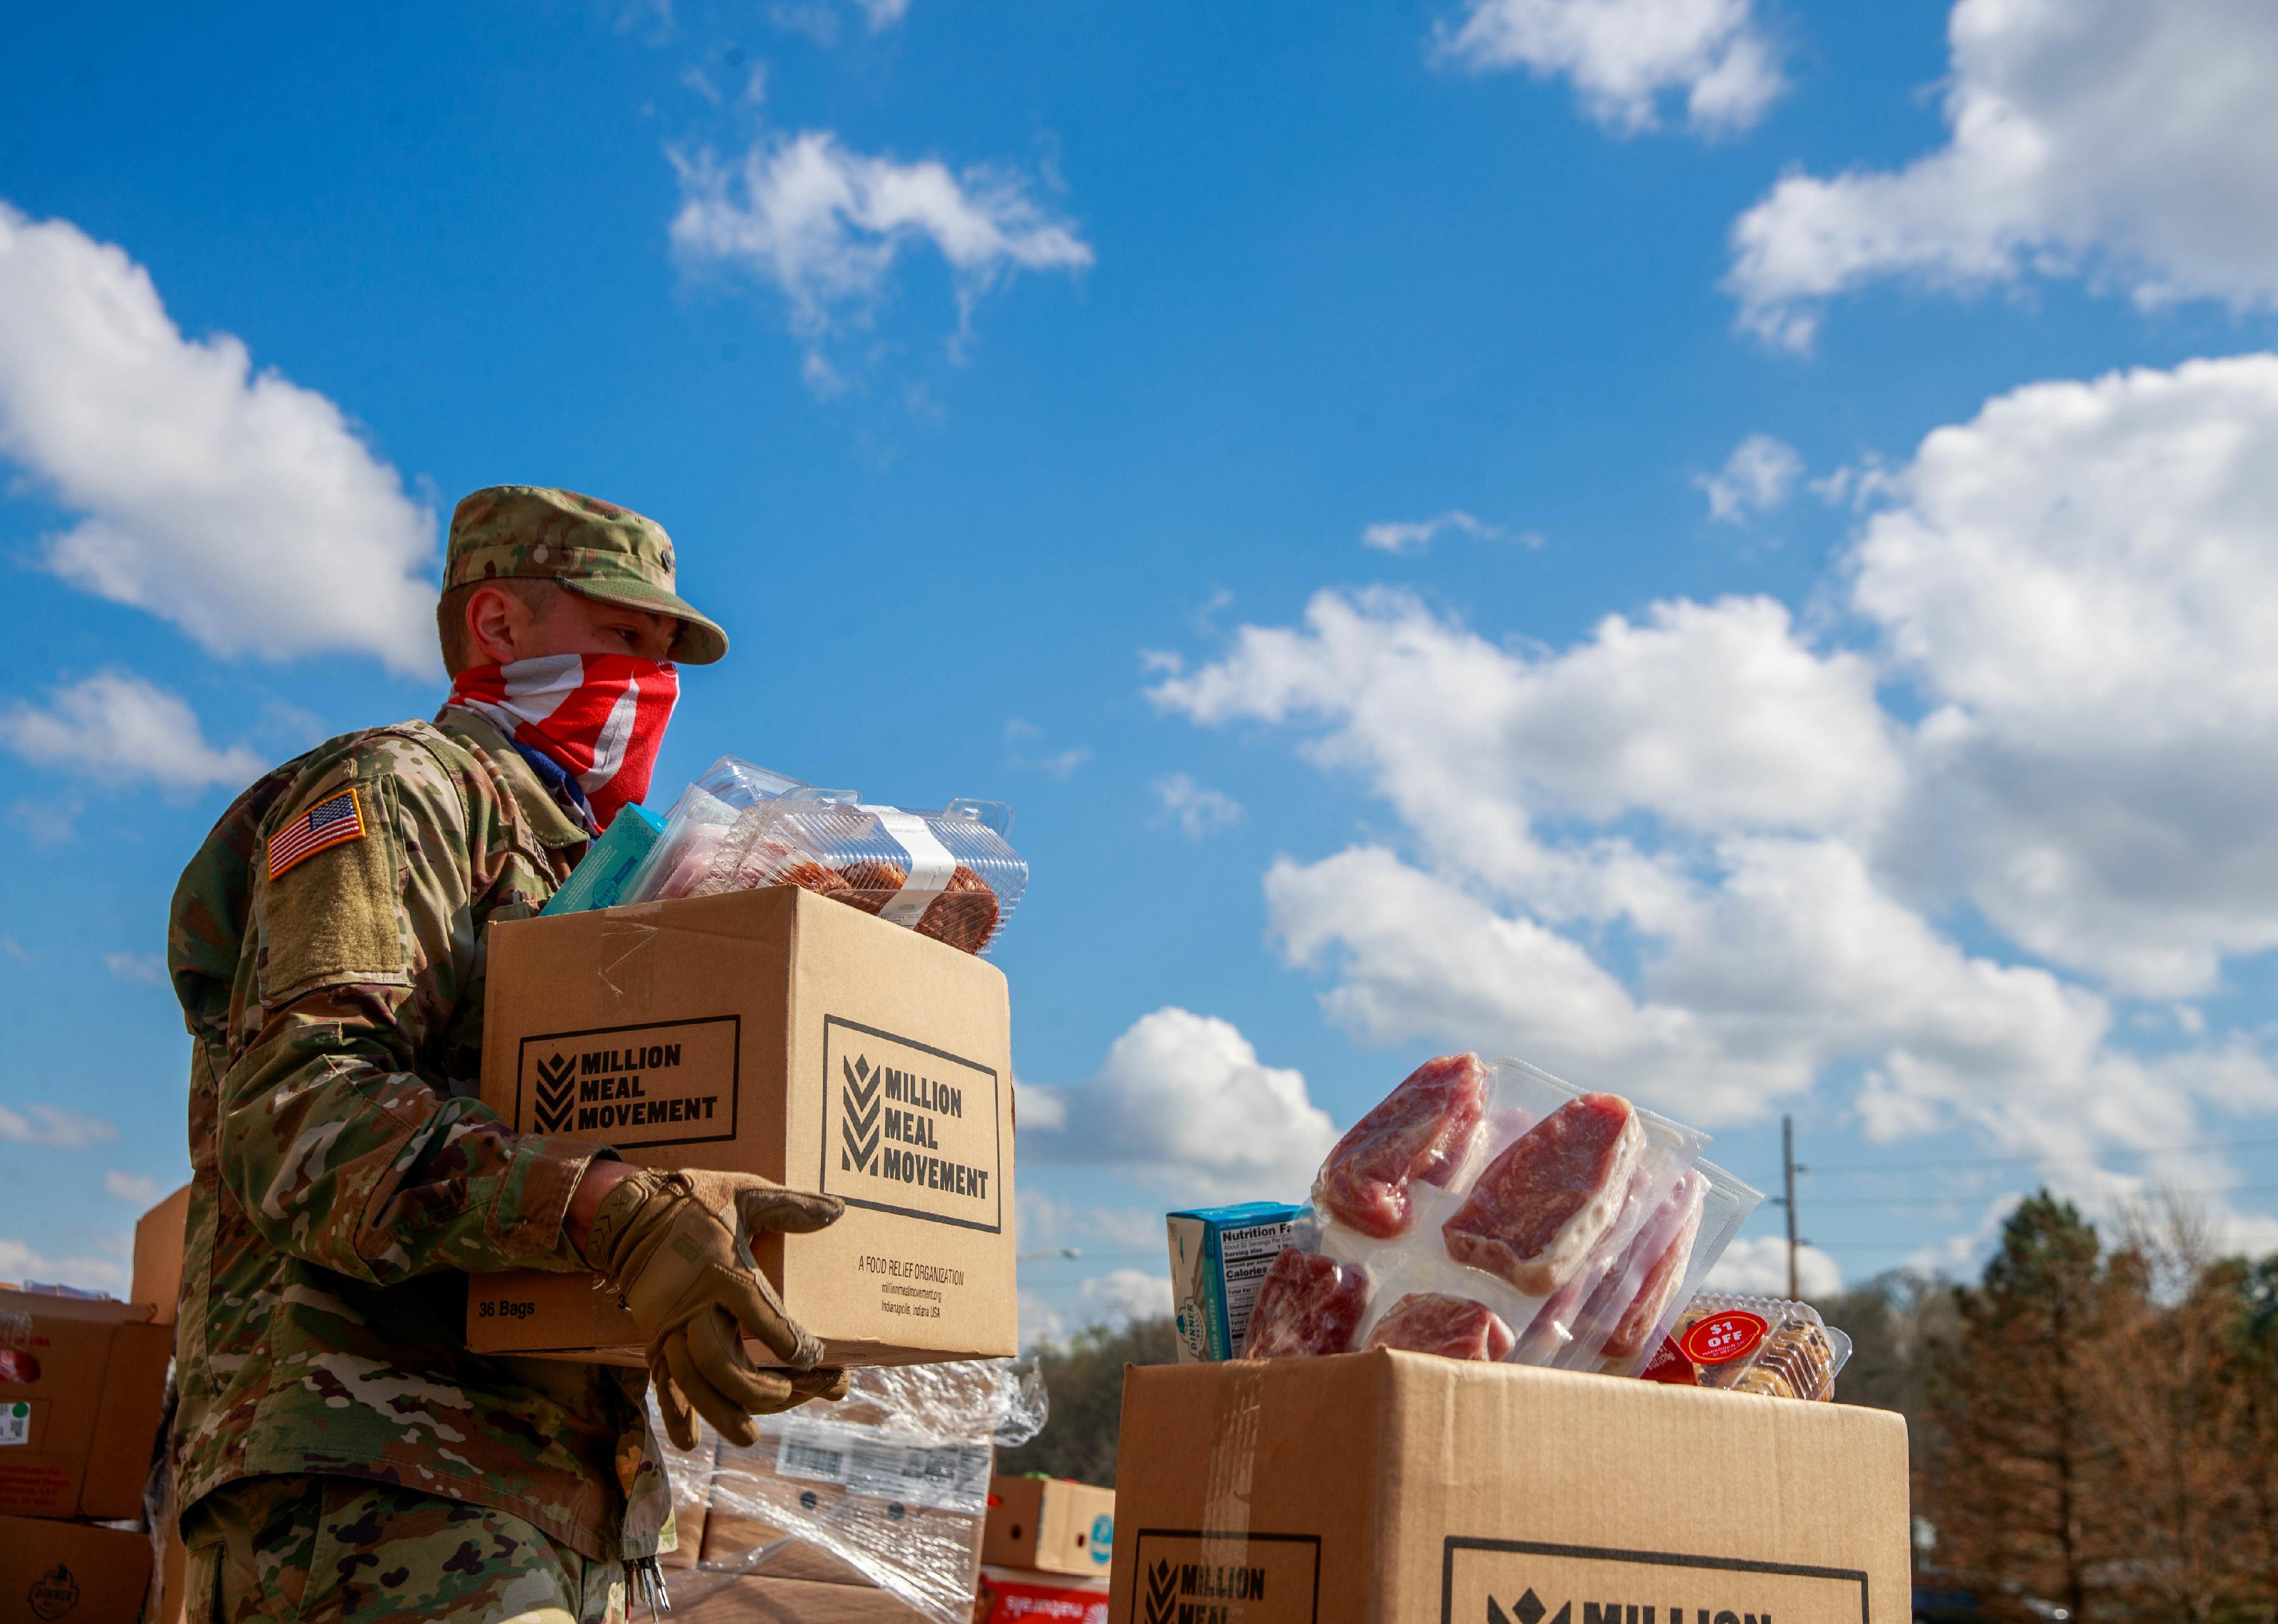 A member of the Indiana National Guard wearing an American flag balaclava carries a box of food while helping workers in distributing food.